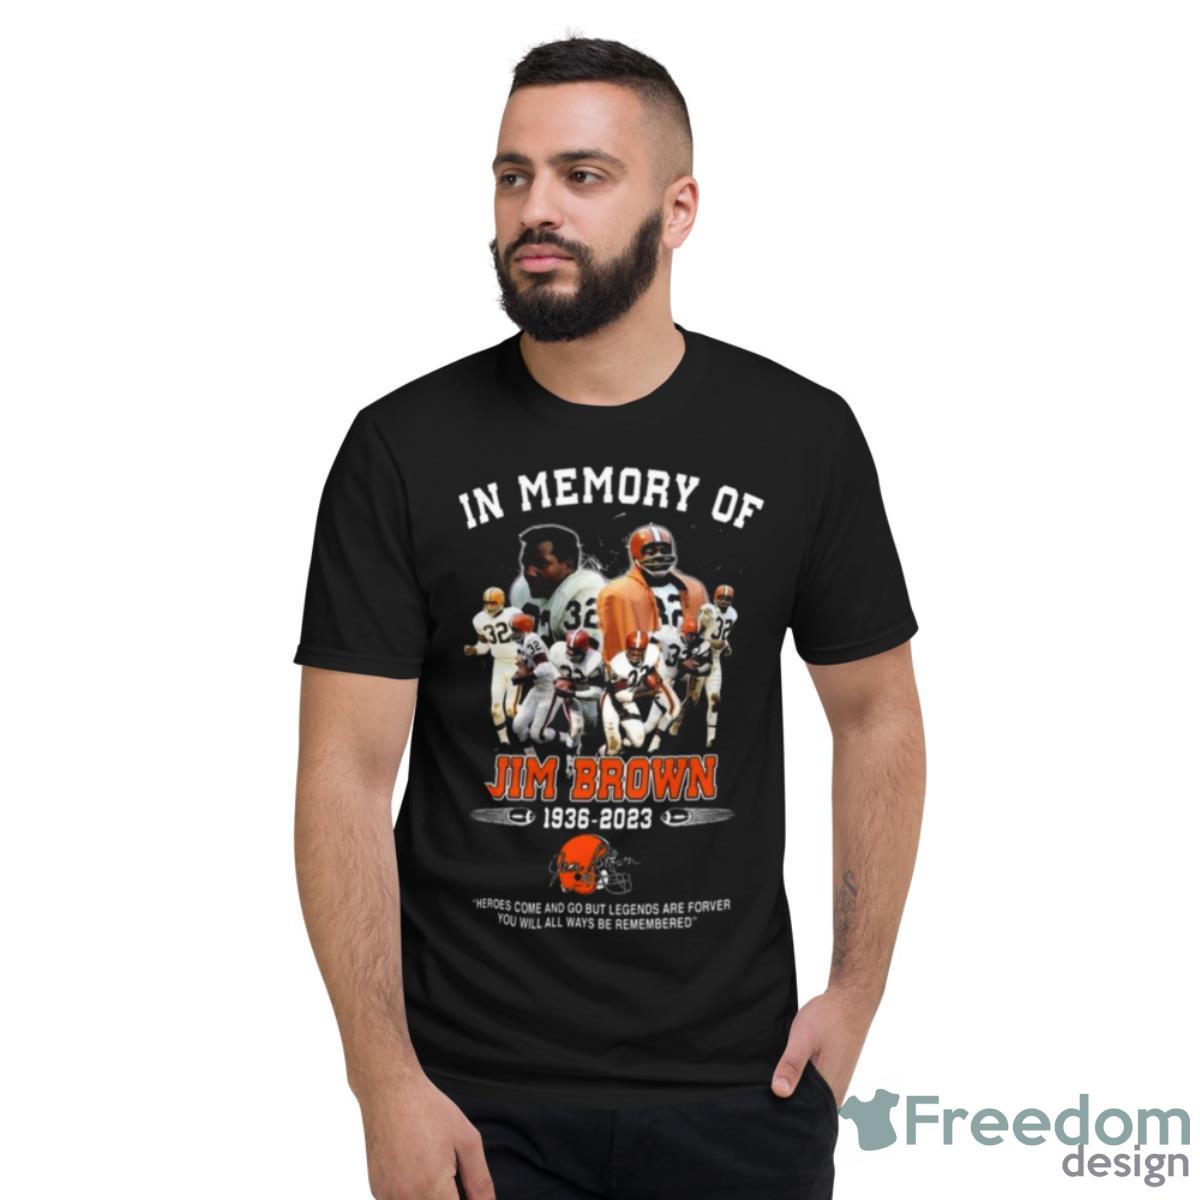 NFL Legend Jim Brown In Memory Of 1936 2023 Heroes Come And Go But Legends Are Forever Shirt